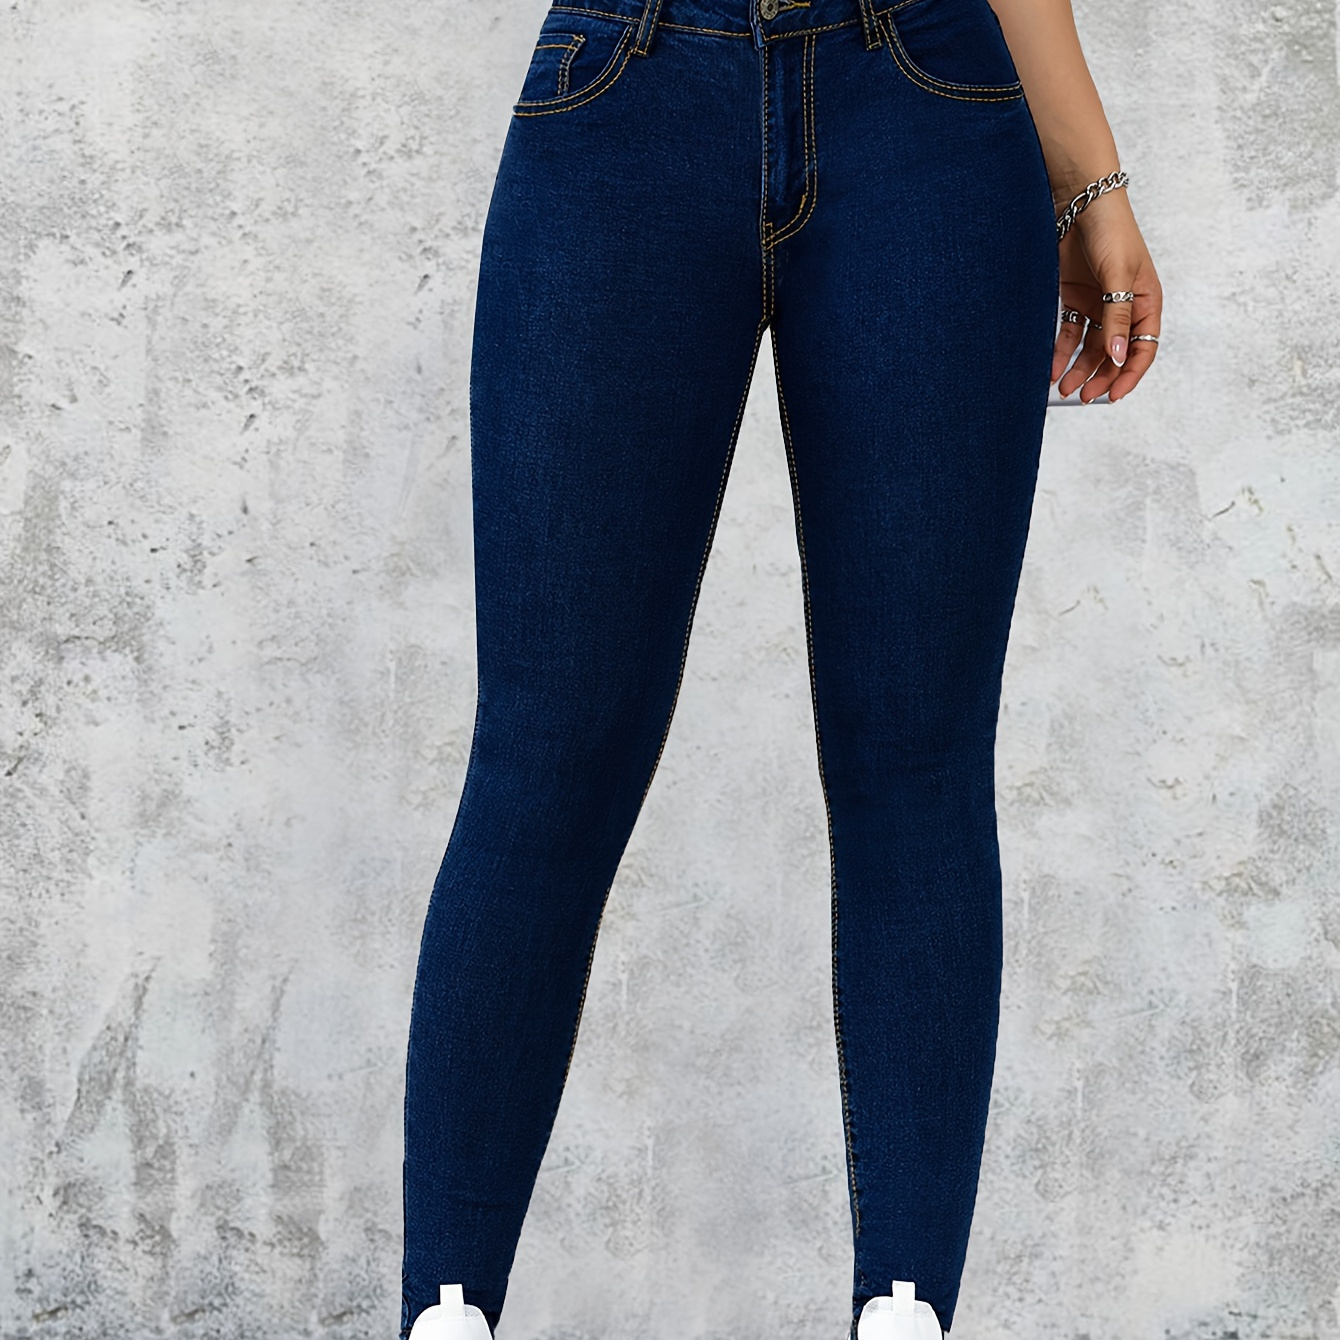 

Women's High Waist Skinny Jeans, Stretch Fabric, Slim Fit Ankle-length Denim Pants, Casual Preppy Style